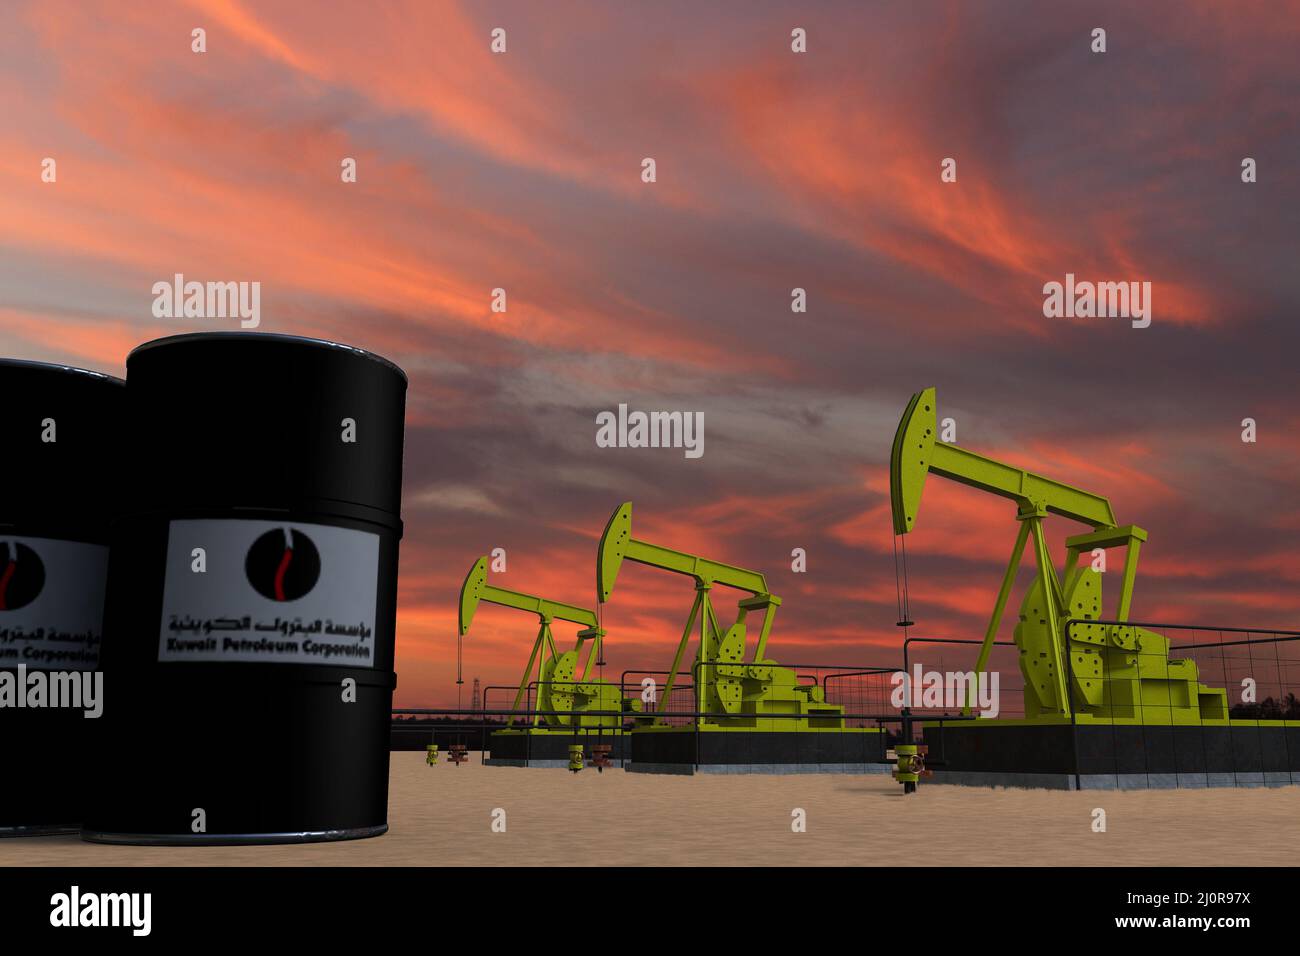 Nice pumpjack oil extraction and cloudy sky in sunset with the KUWAIT PETROLEUM CORPORATION flag on oil barrels 3D rendering Stock Photo